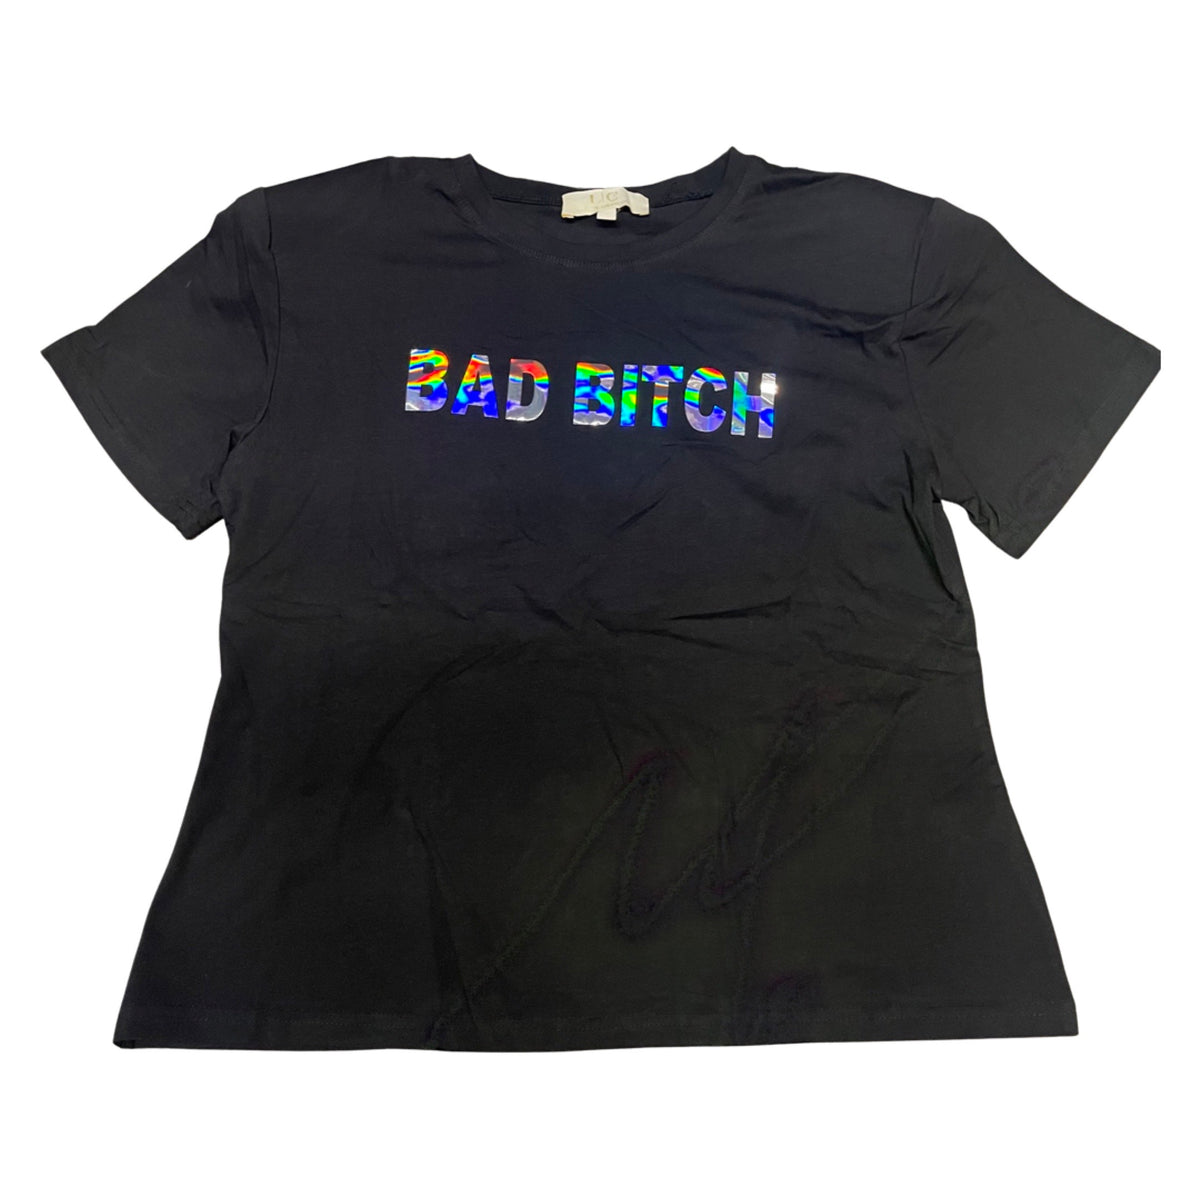 JUST BAD BLACK CHAINED SHIRT